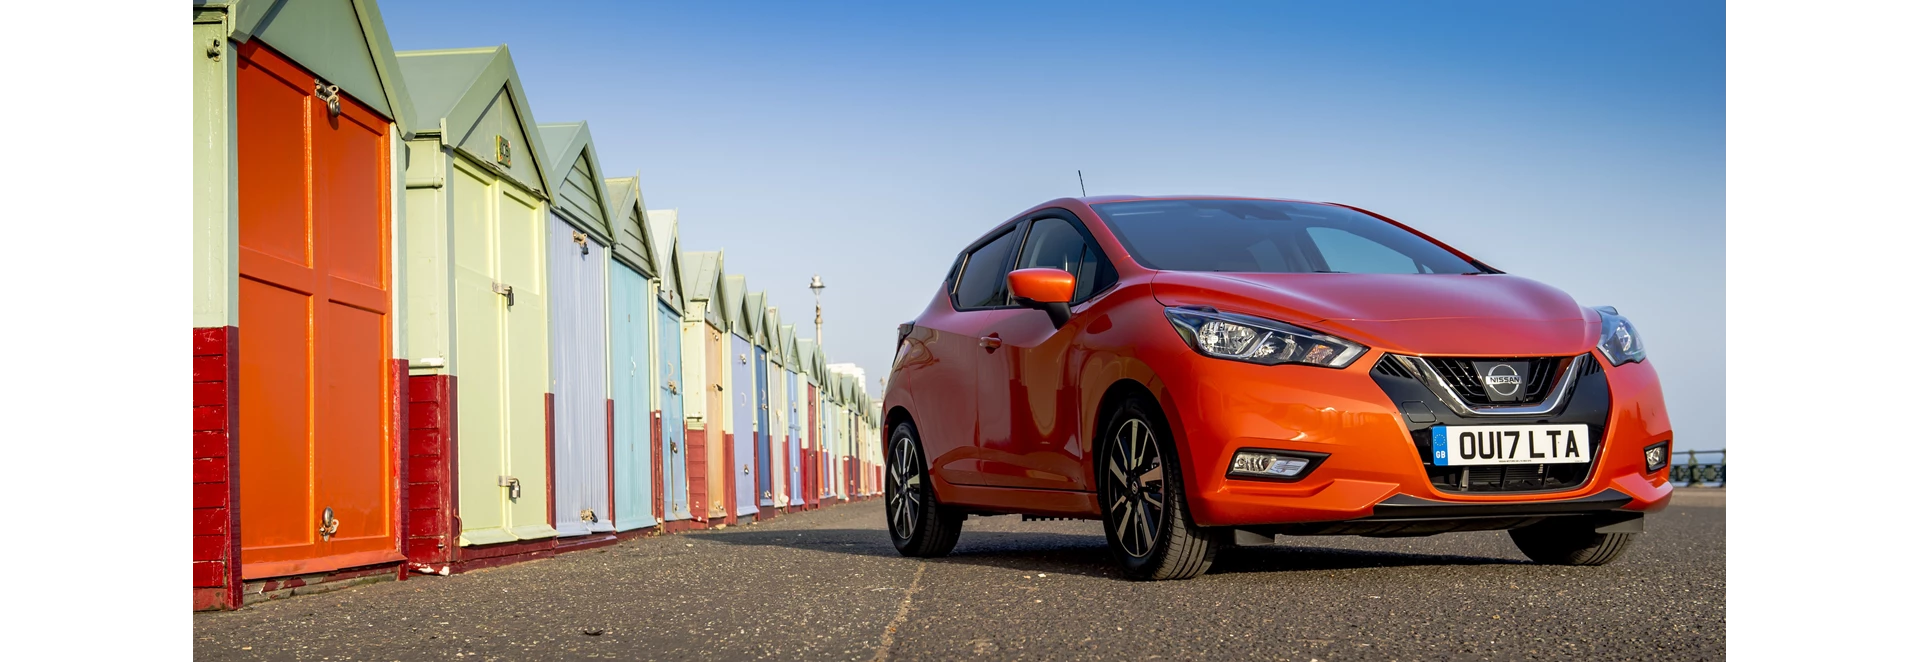 Bold new Nissan Micra unveiled, due to go on sale next March 